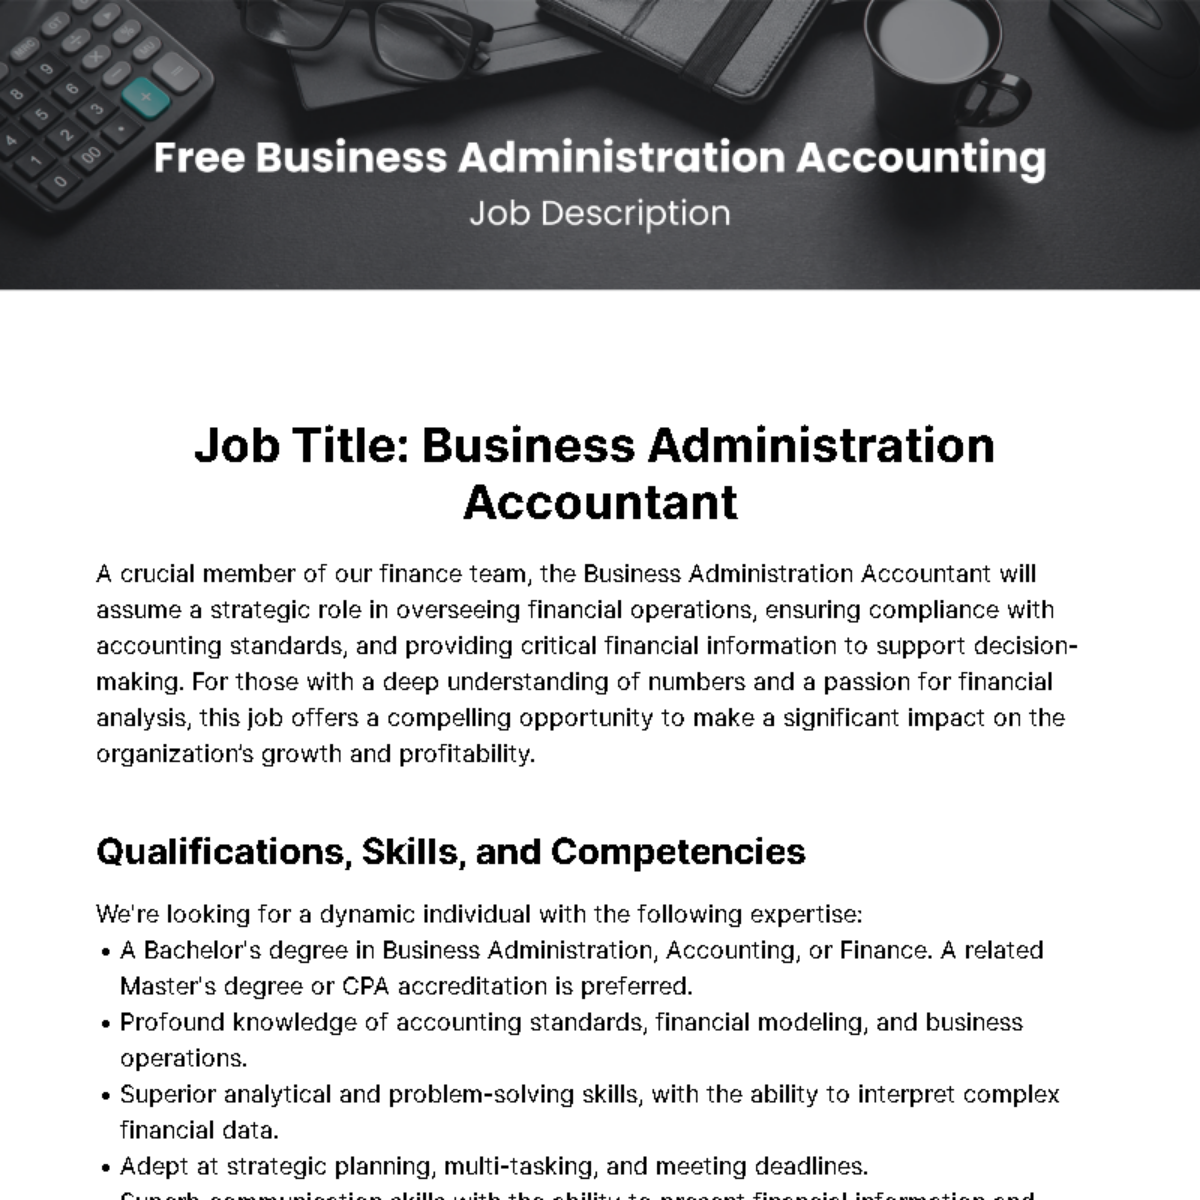 Business Administration Accounting Job Description Template